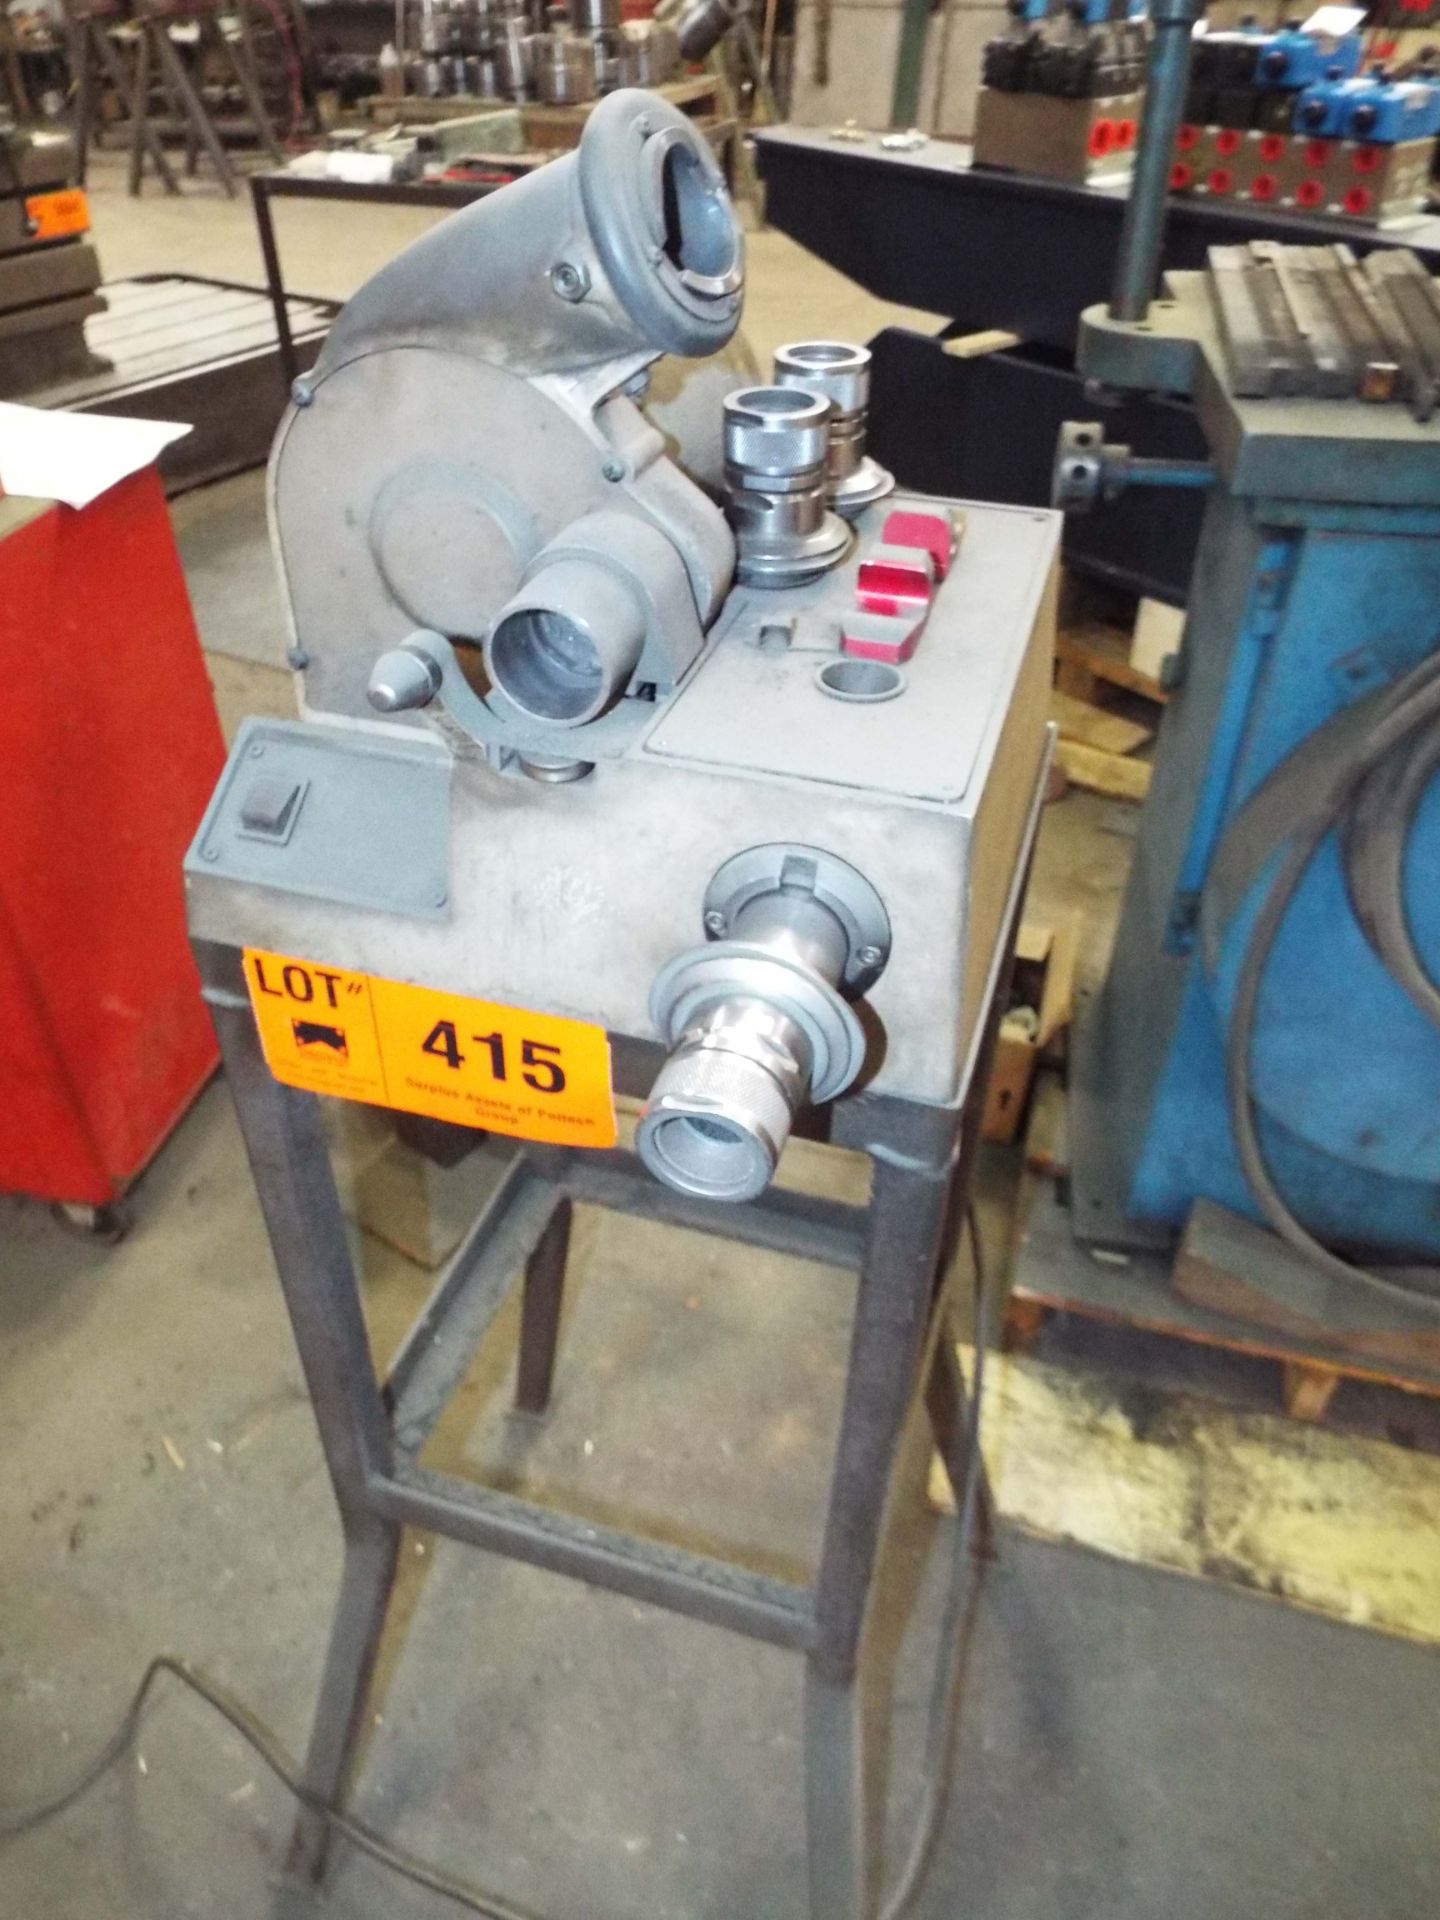 MFG. UNKNOWN DRILL SHARPENER/GRINDER, S/N: N/A (LOCATED AT 215 DRUMLIN CIRCLE, CONCORD, ON)